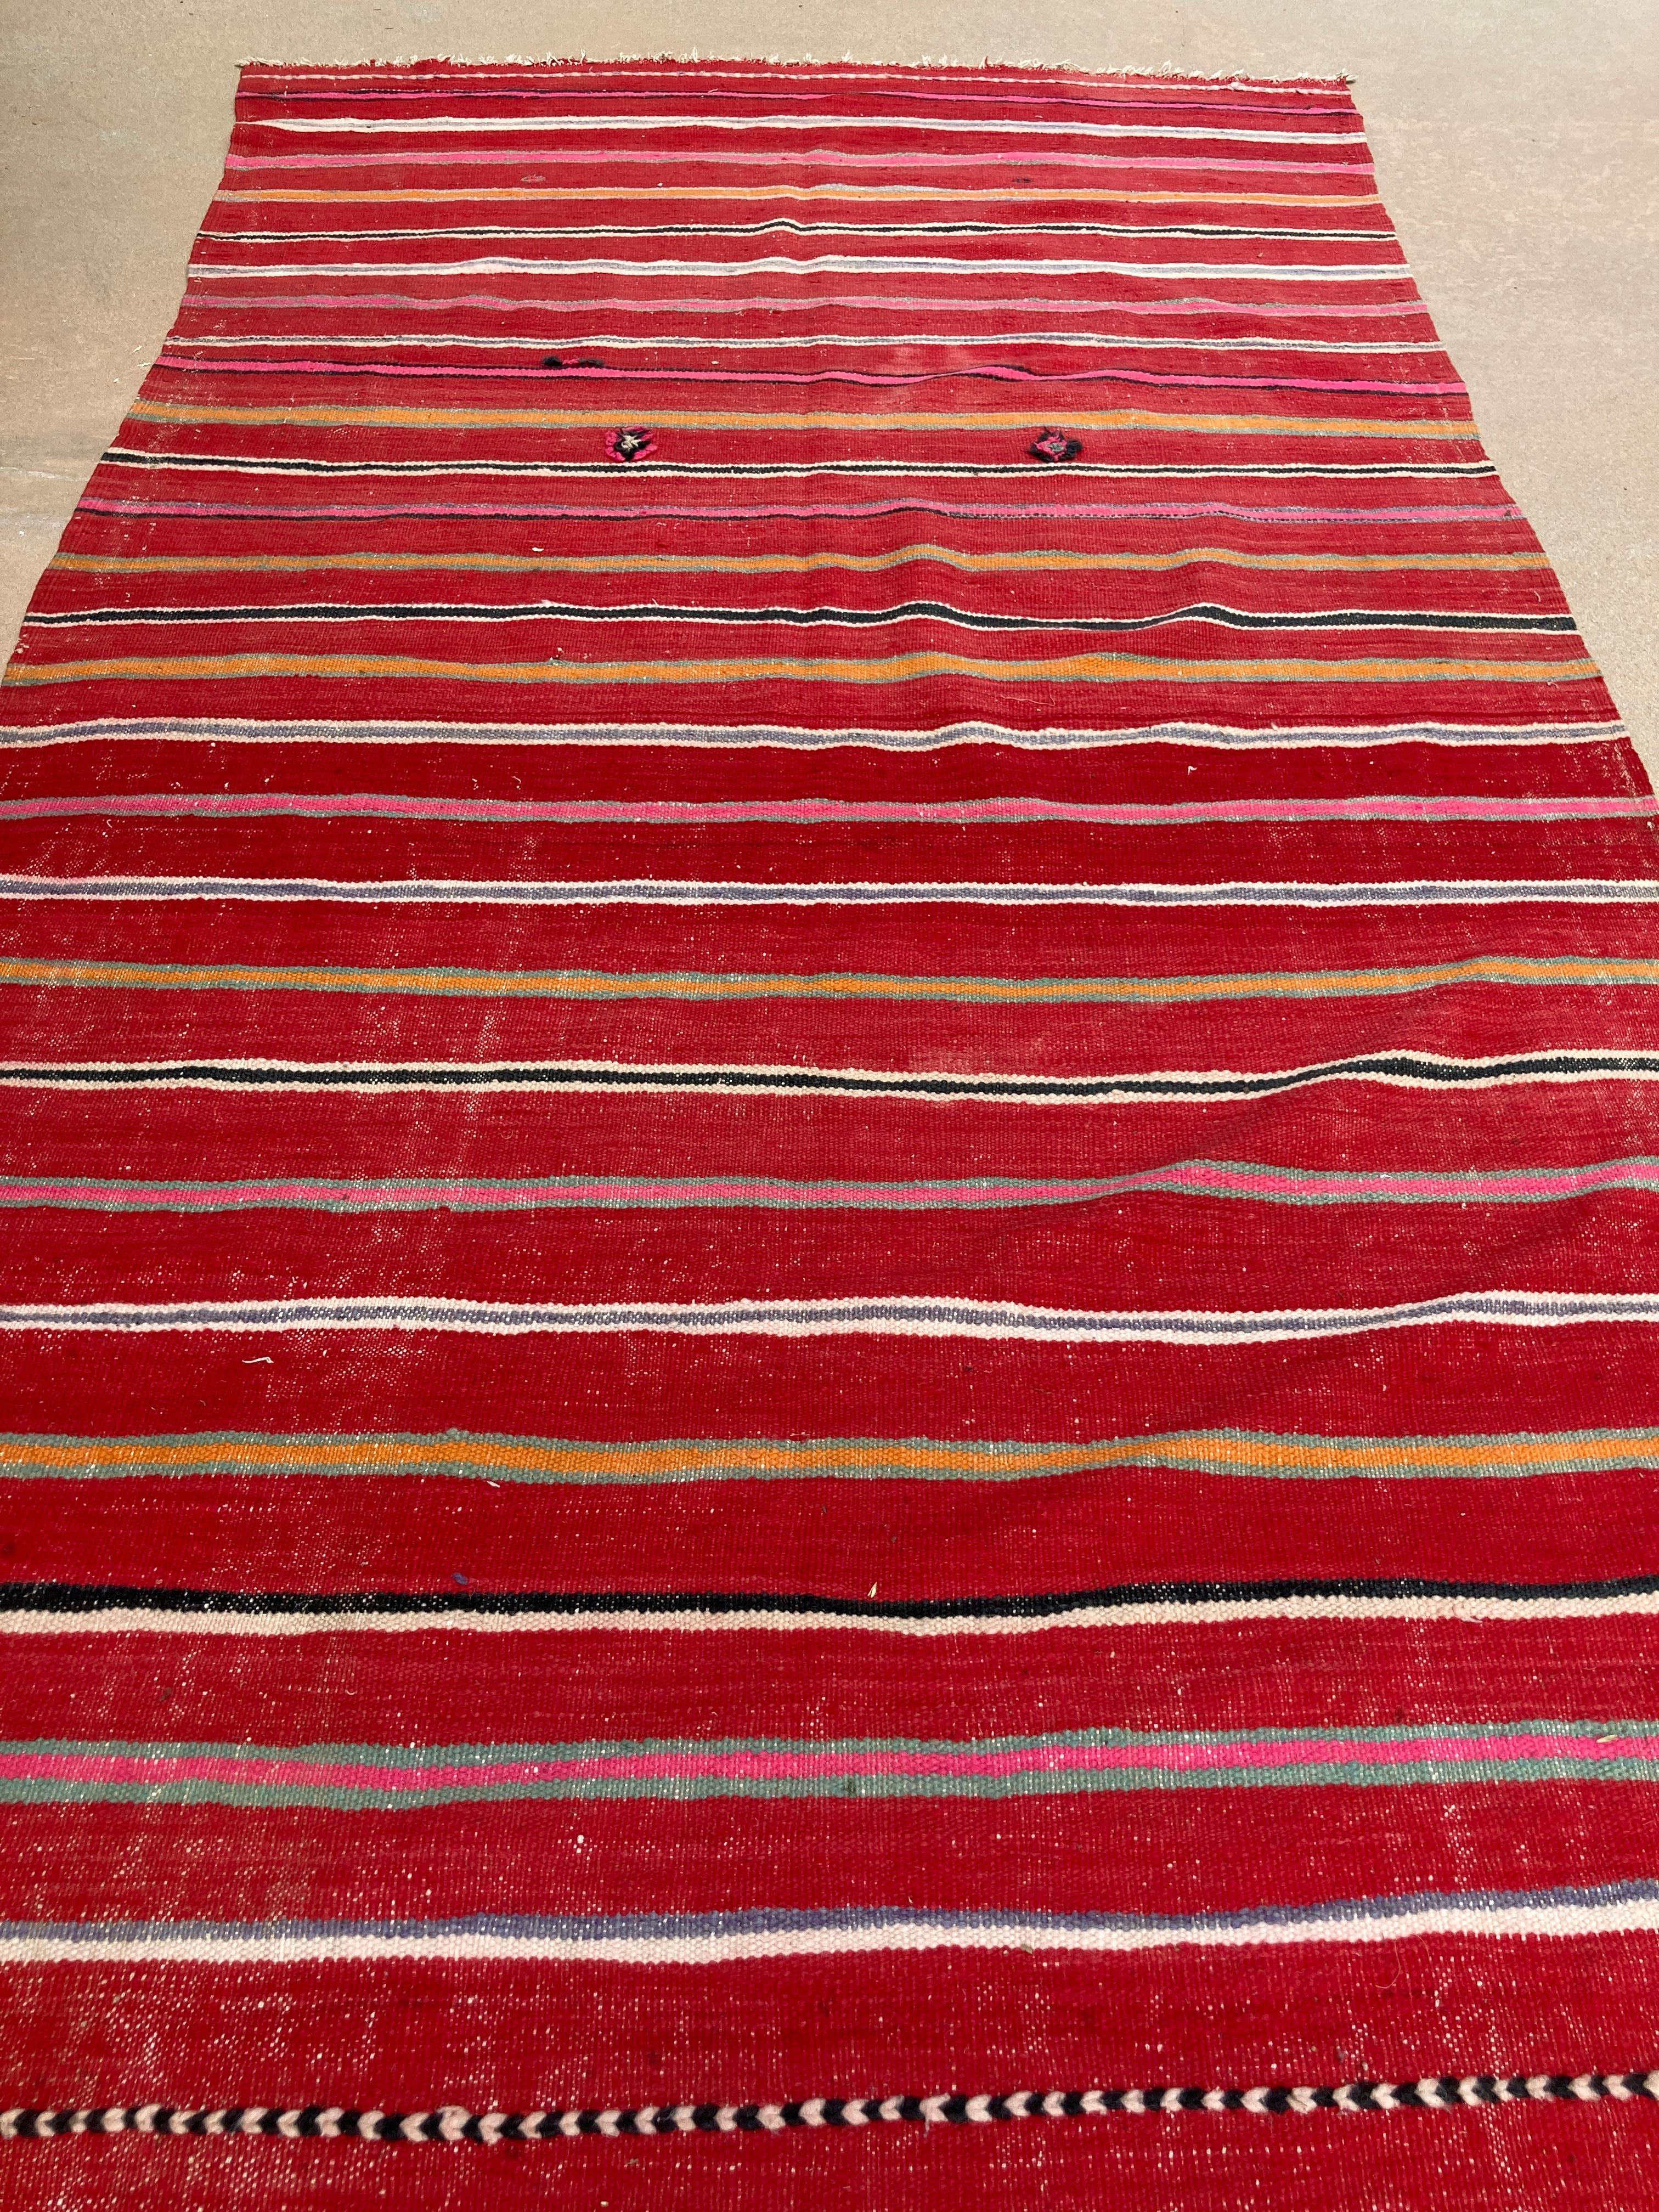 1960s Moroccan Vintage Flat-Weave Ethnic Textile Rug In Good Condition For Sale In North Hollywood, CA